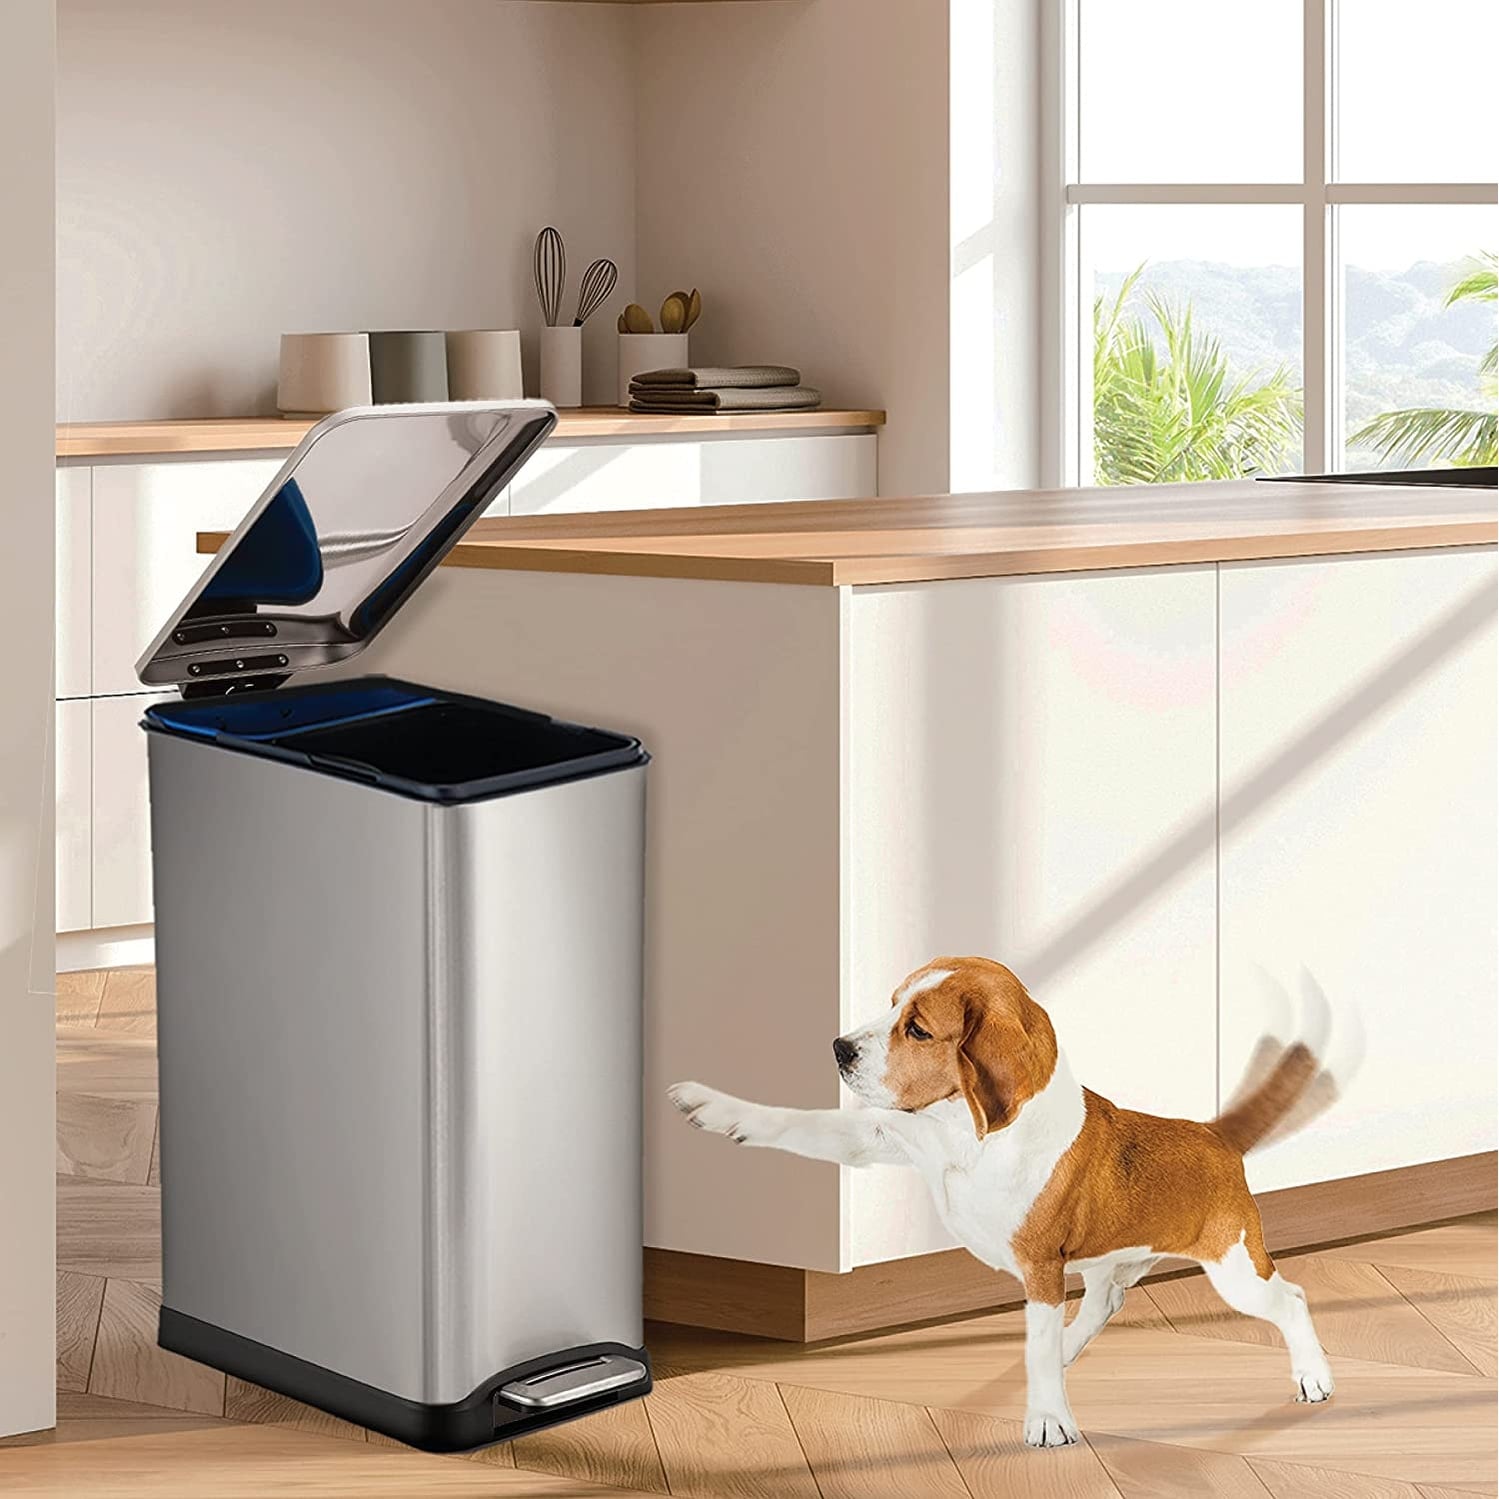 https://ak1.ostkcdn.com/images/products/is/images/direct/ec9f8debbd982bf8422940db25e93a7fbb4c0b47/Home-Zone-Living-13-Gallon-Kitchen-Trash-Can%2C-Dual-Compartment-Recycle-Combo%2C-Slim-Body-Stainless-Steel-Design.jpg